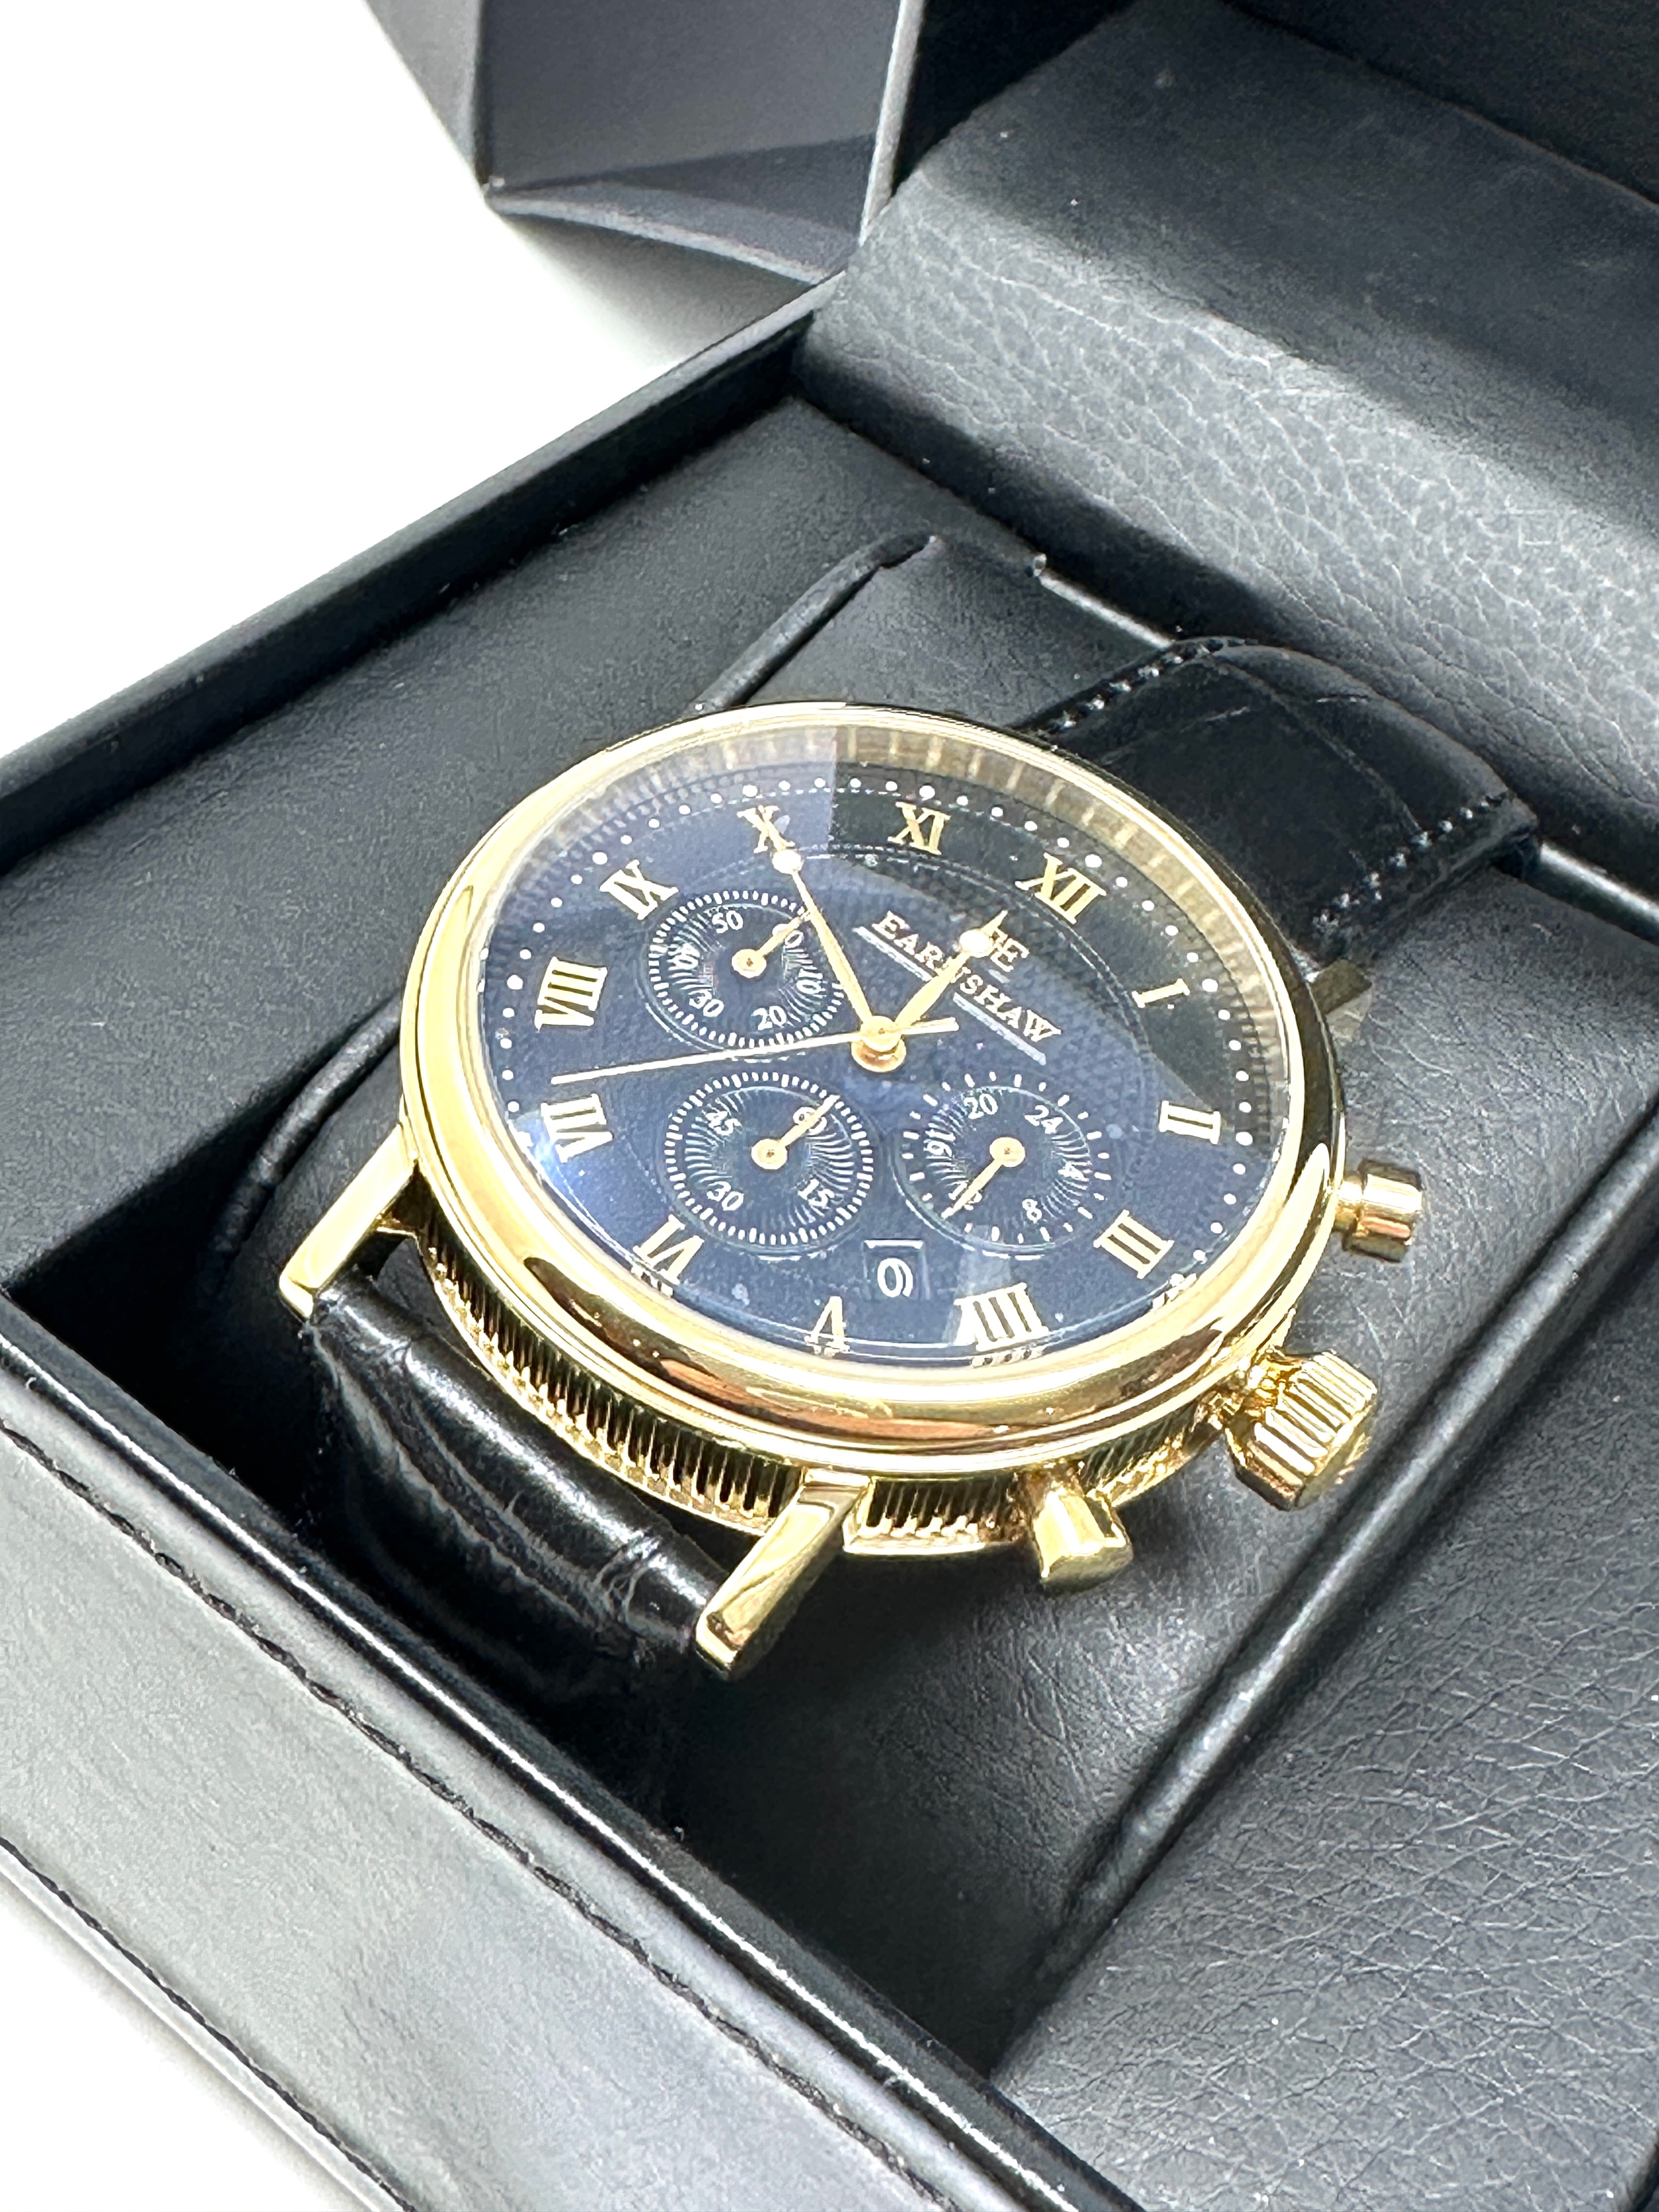 New boxed thomas earnshaw chronograph gents wristwatch the watch is ticking - Bild 2 aus 4